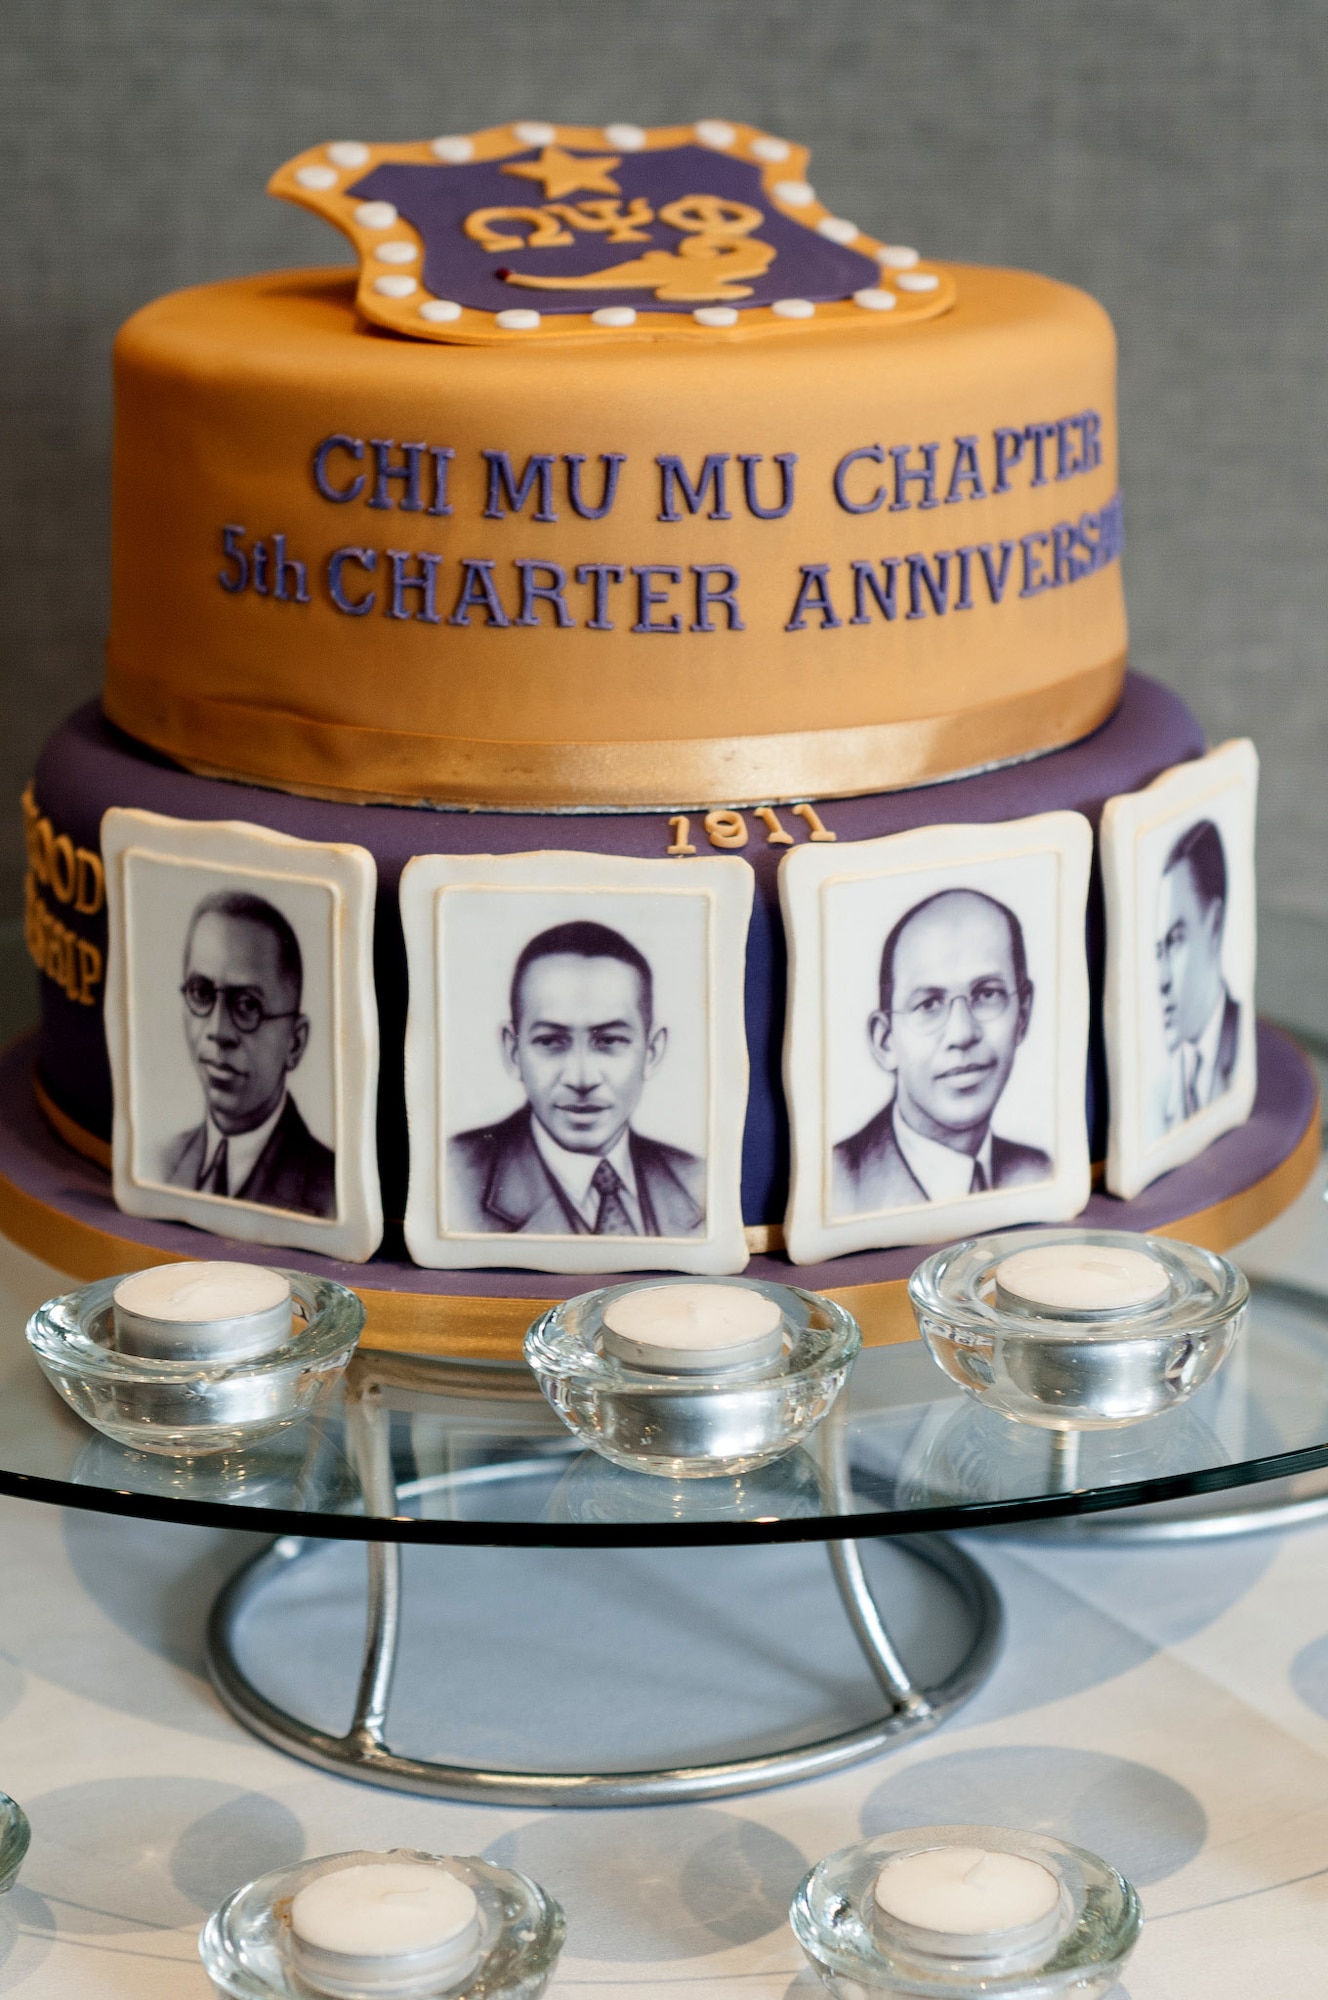 The newest and the oldest members, present at the event, cut the Chi Mu Mu Chapter Fifth Anniversary cake, April 15, 2017, at a banquet in Birmingham, England. Chi Mu Mu is the U.K. chapter of the Omega Psi Phi Fraternity, headquartered in the States. Personnel from RAF Mildenhall and RAF Lakenheath, England, were invited to the evening as members and patrons. (courtesy photo)